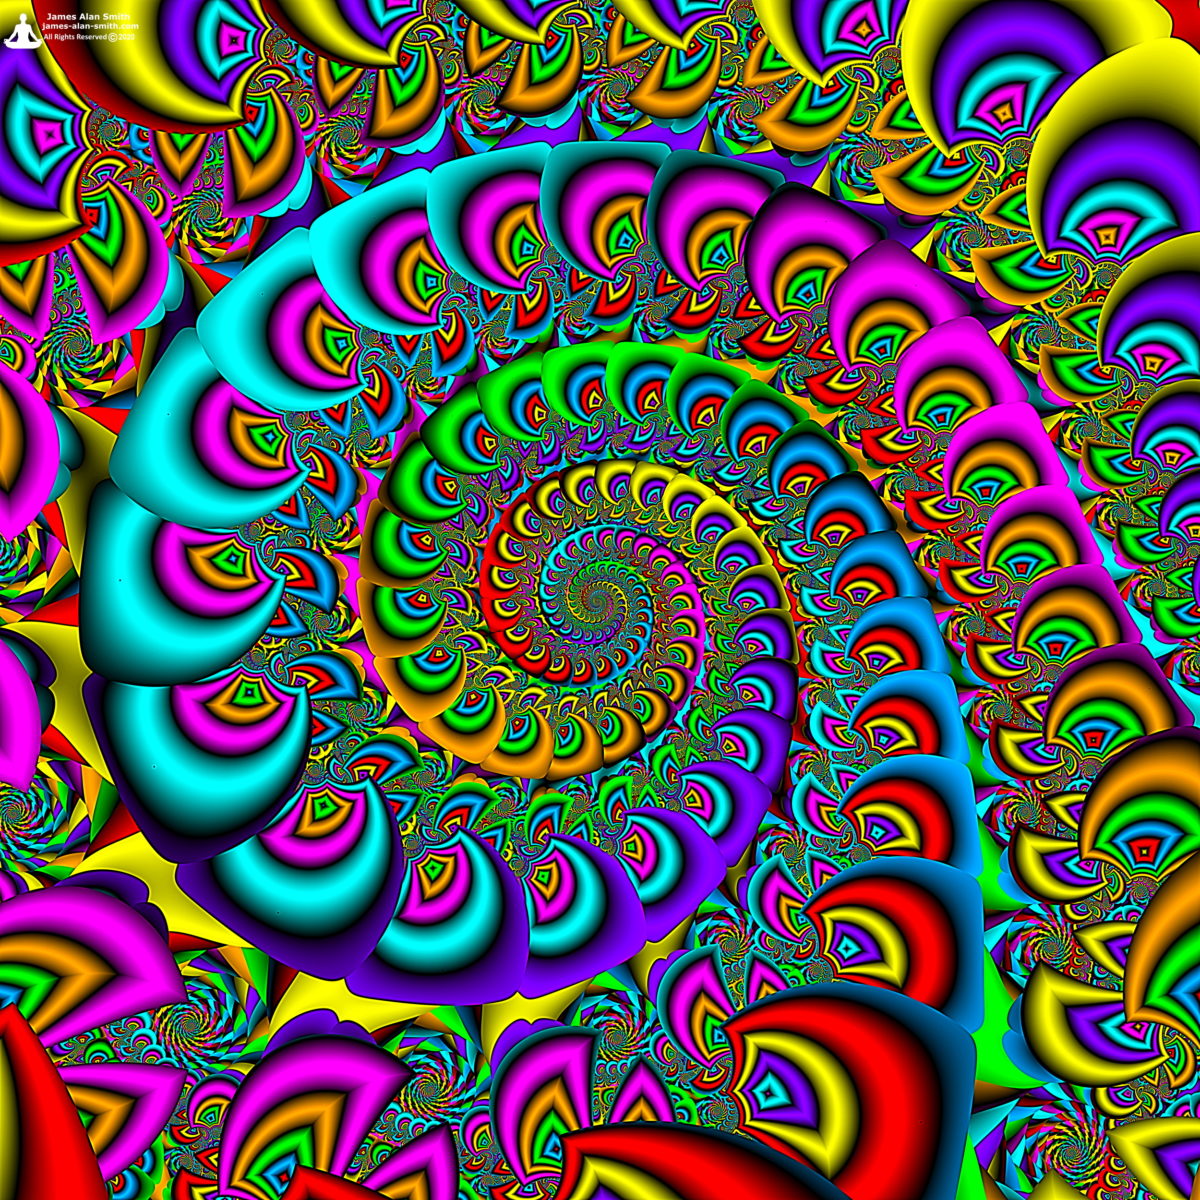 Psychedelic-Swirl: Artwork by James Alan Smith